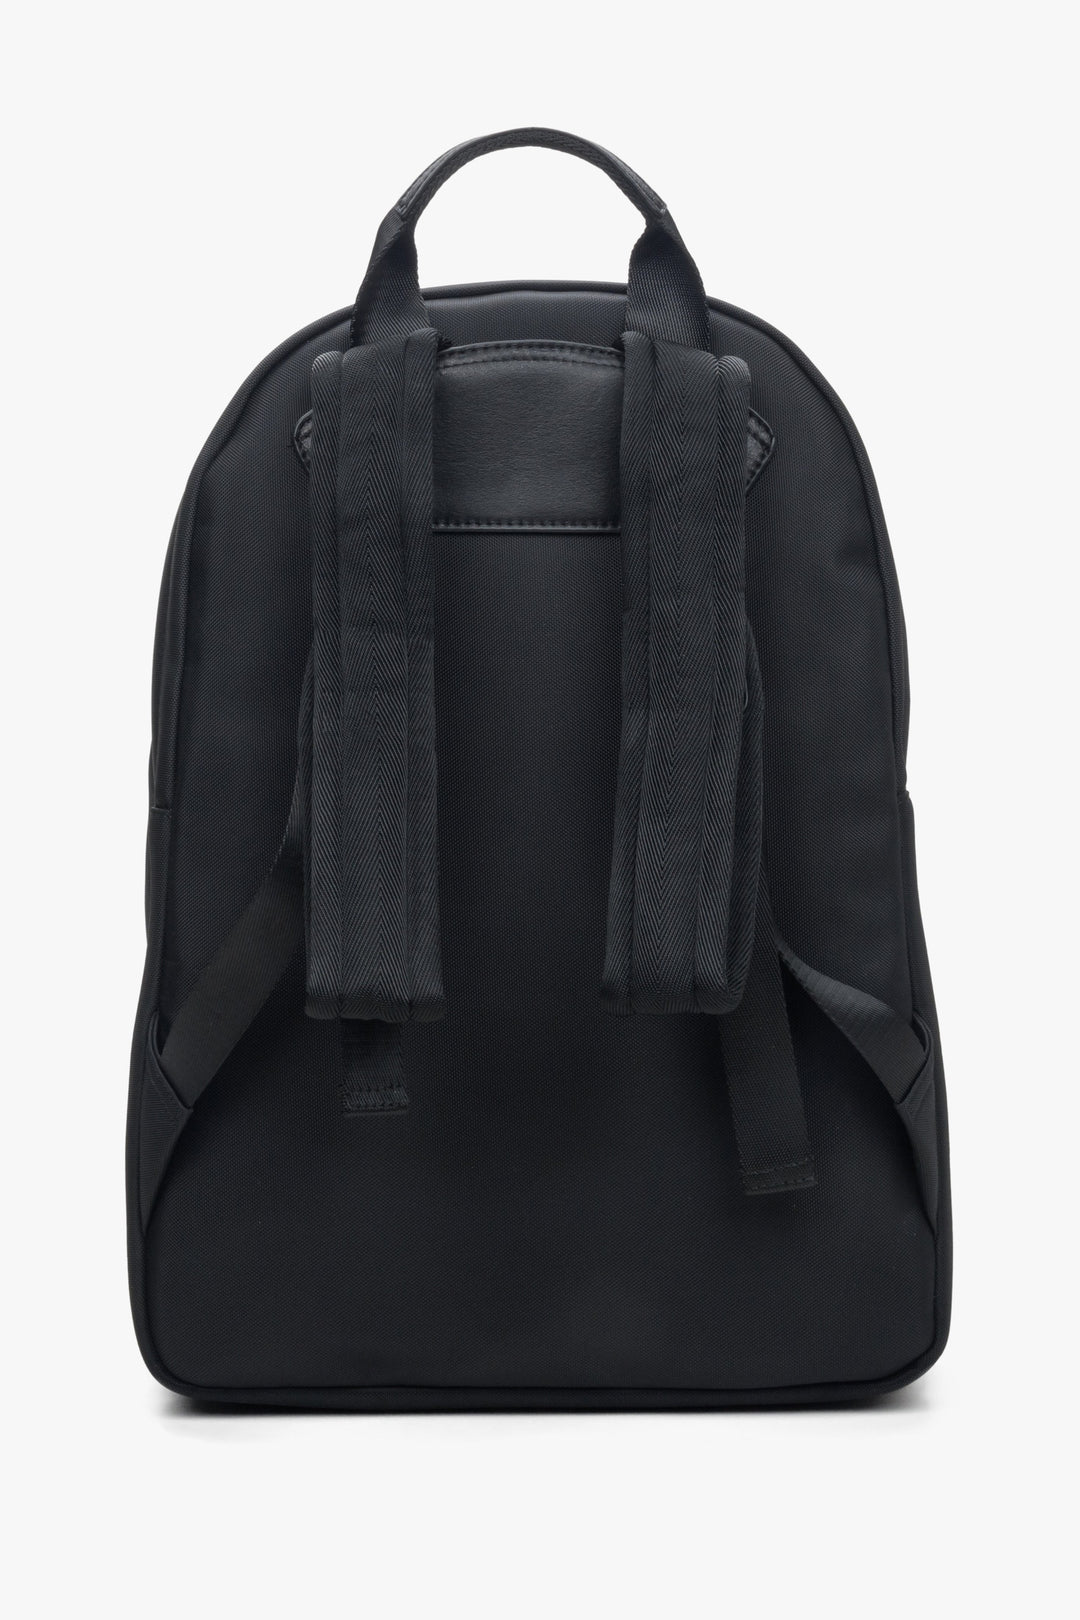 A large, spacious men's backpack with adjustable shoulder straps - back view of the model.